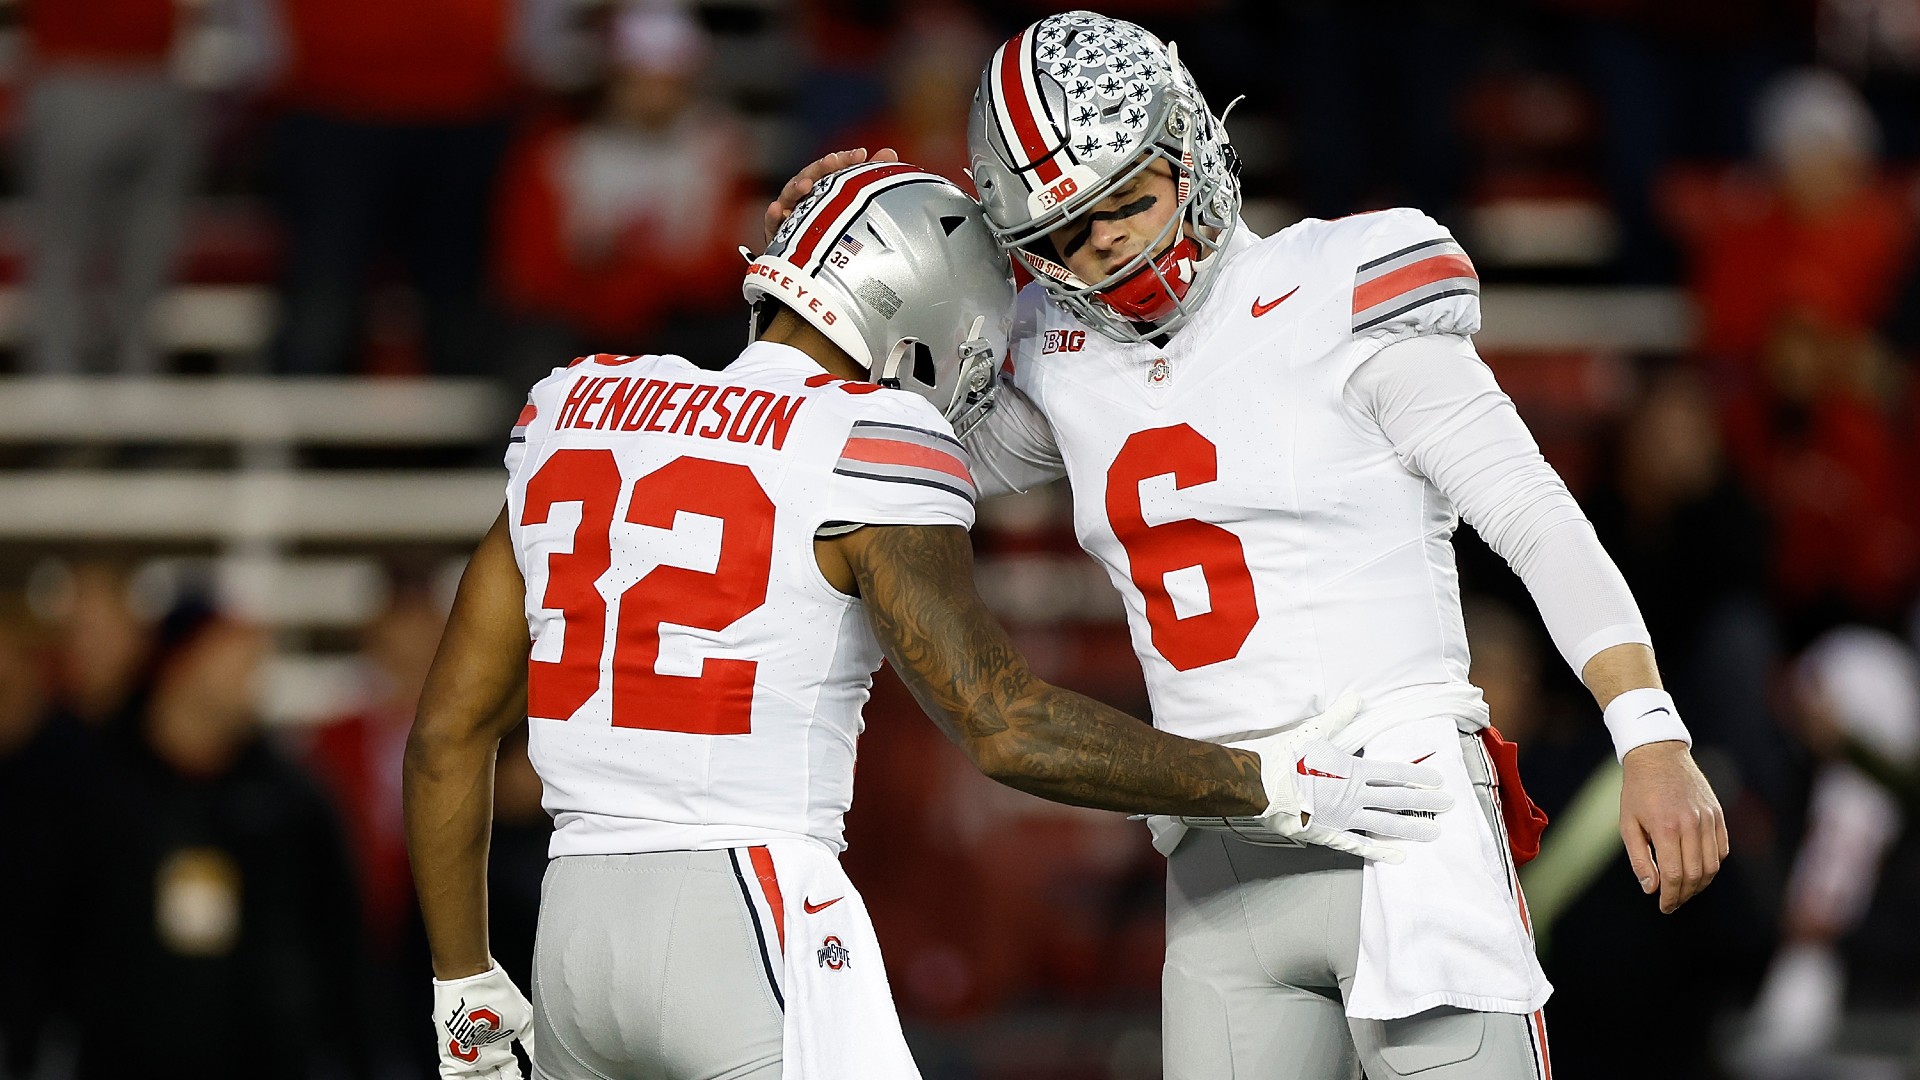 ohio state players skipping cotton bowl: here's the full list of buckeyes who opted out vs. missouri